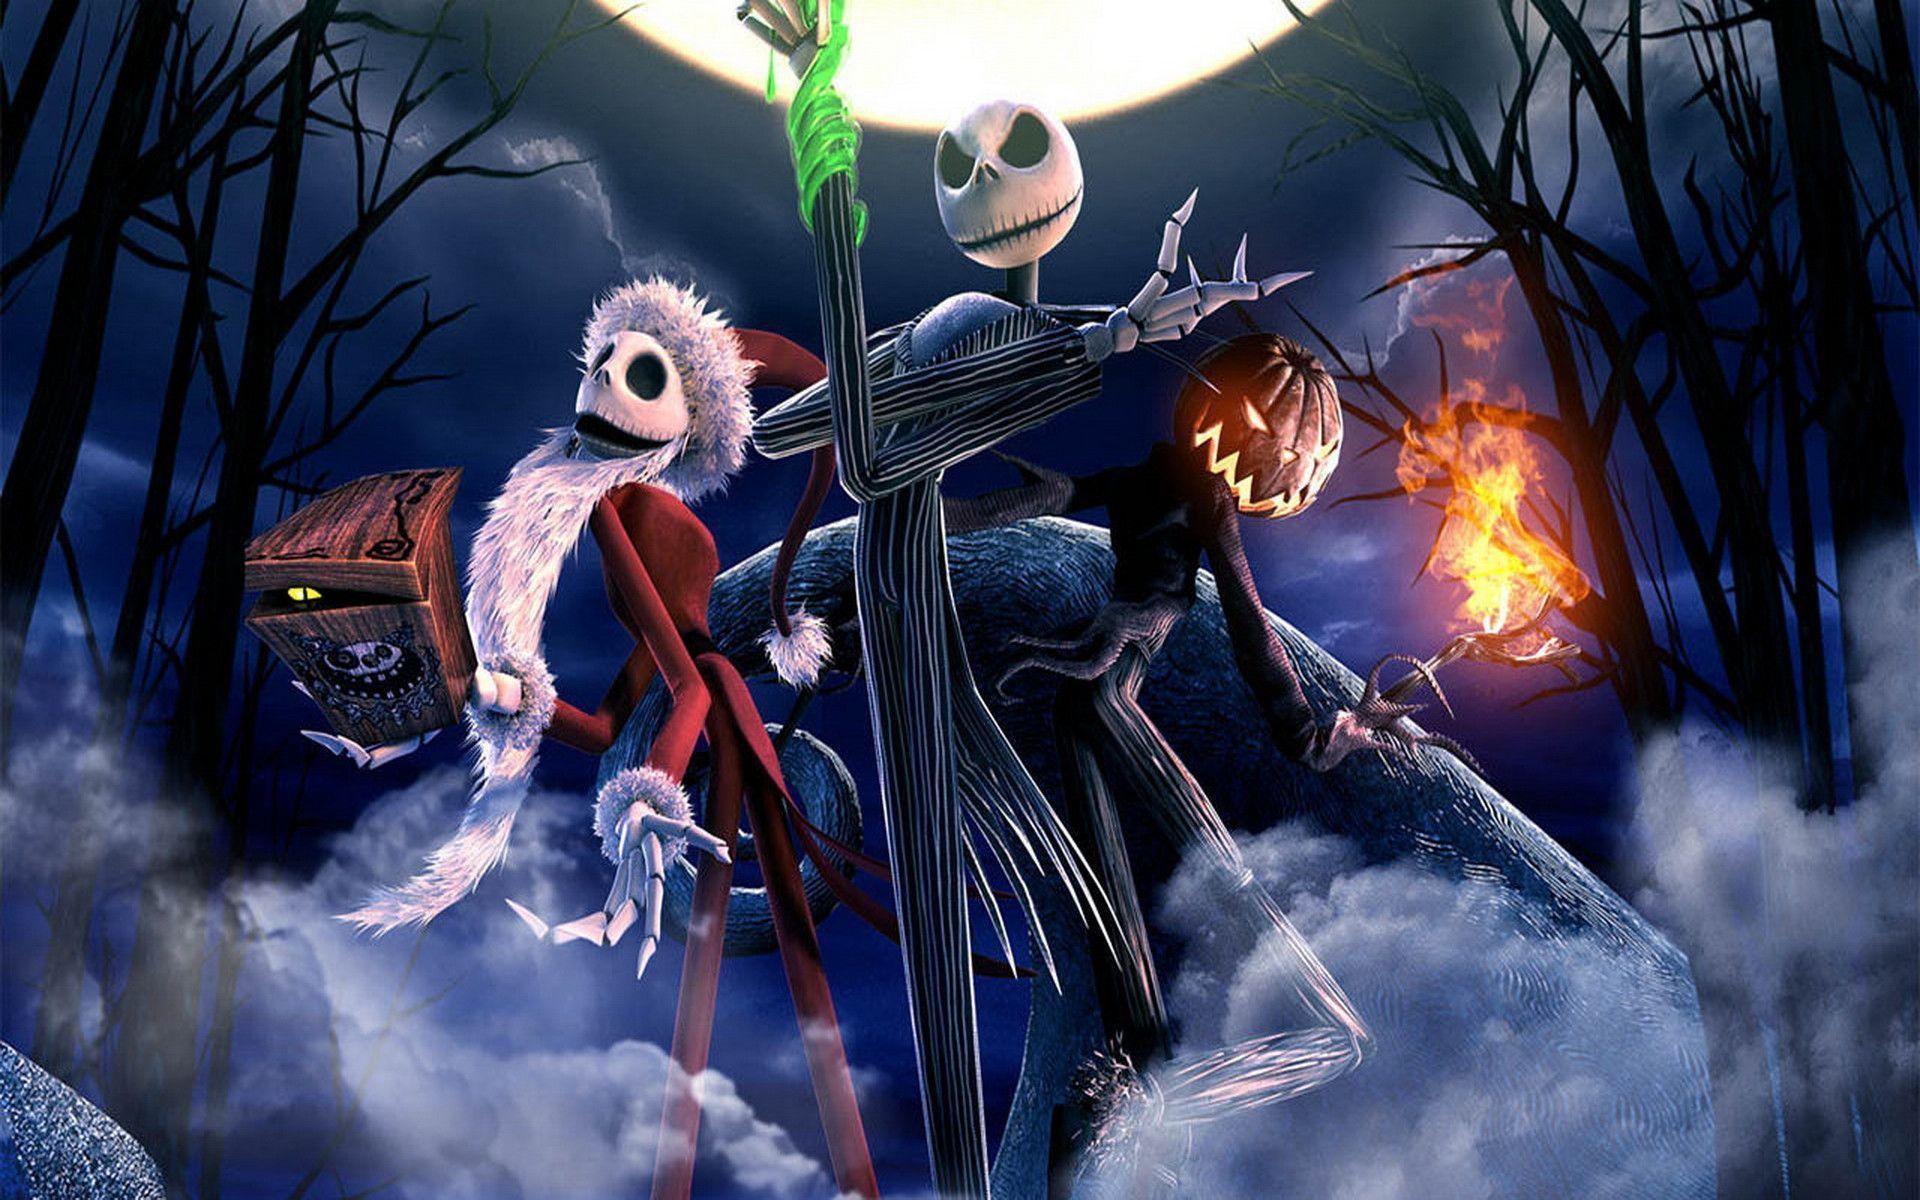 Nightmare Before Christmas Overview